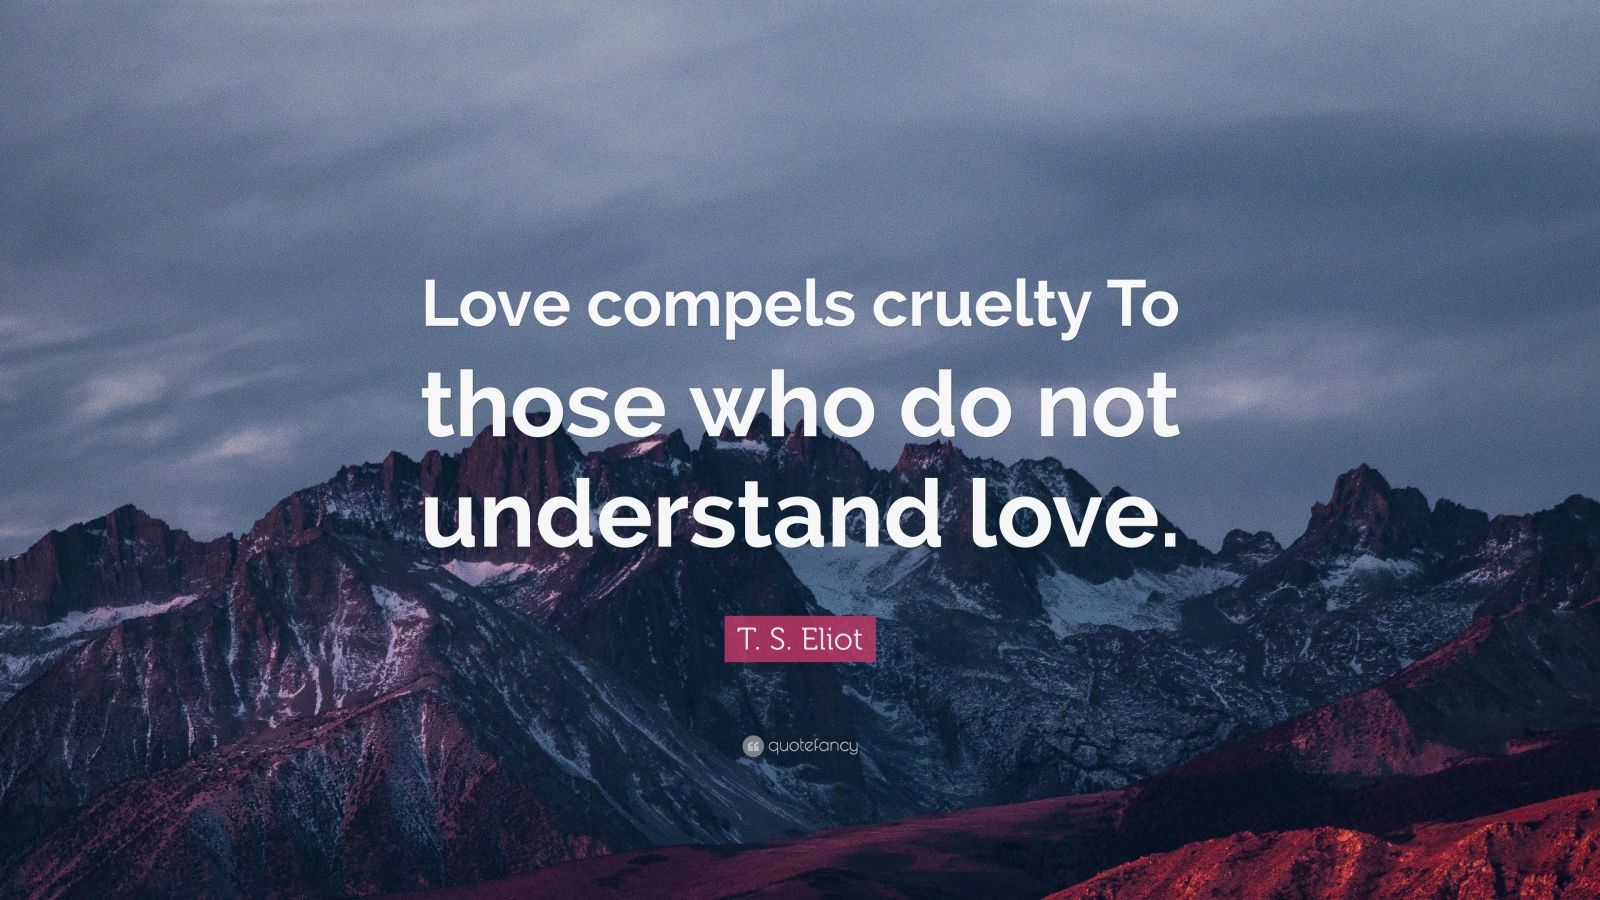 T. S. Eliot Quote: “Love compels cruelty To those who do not understand ...